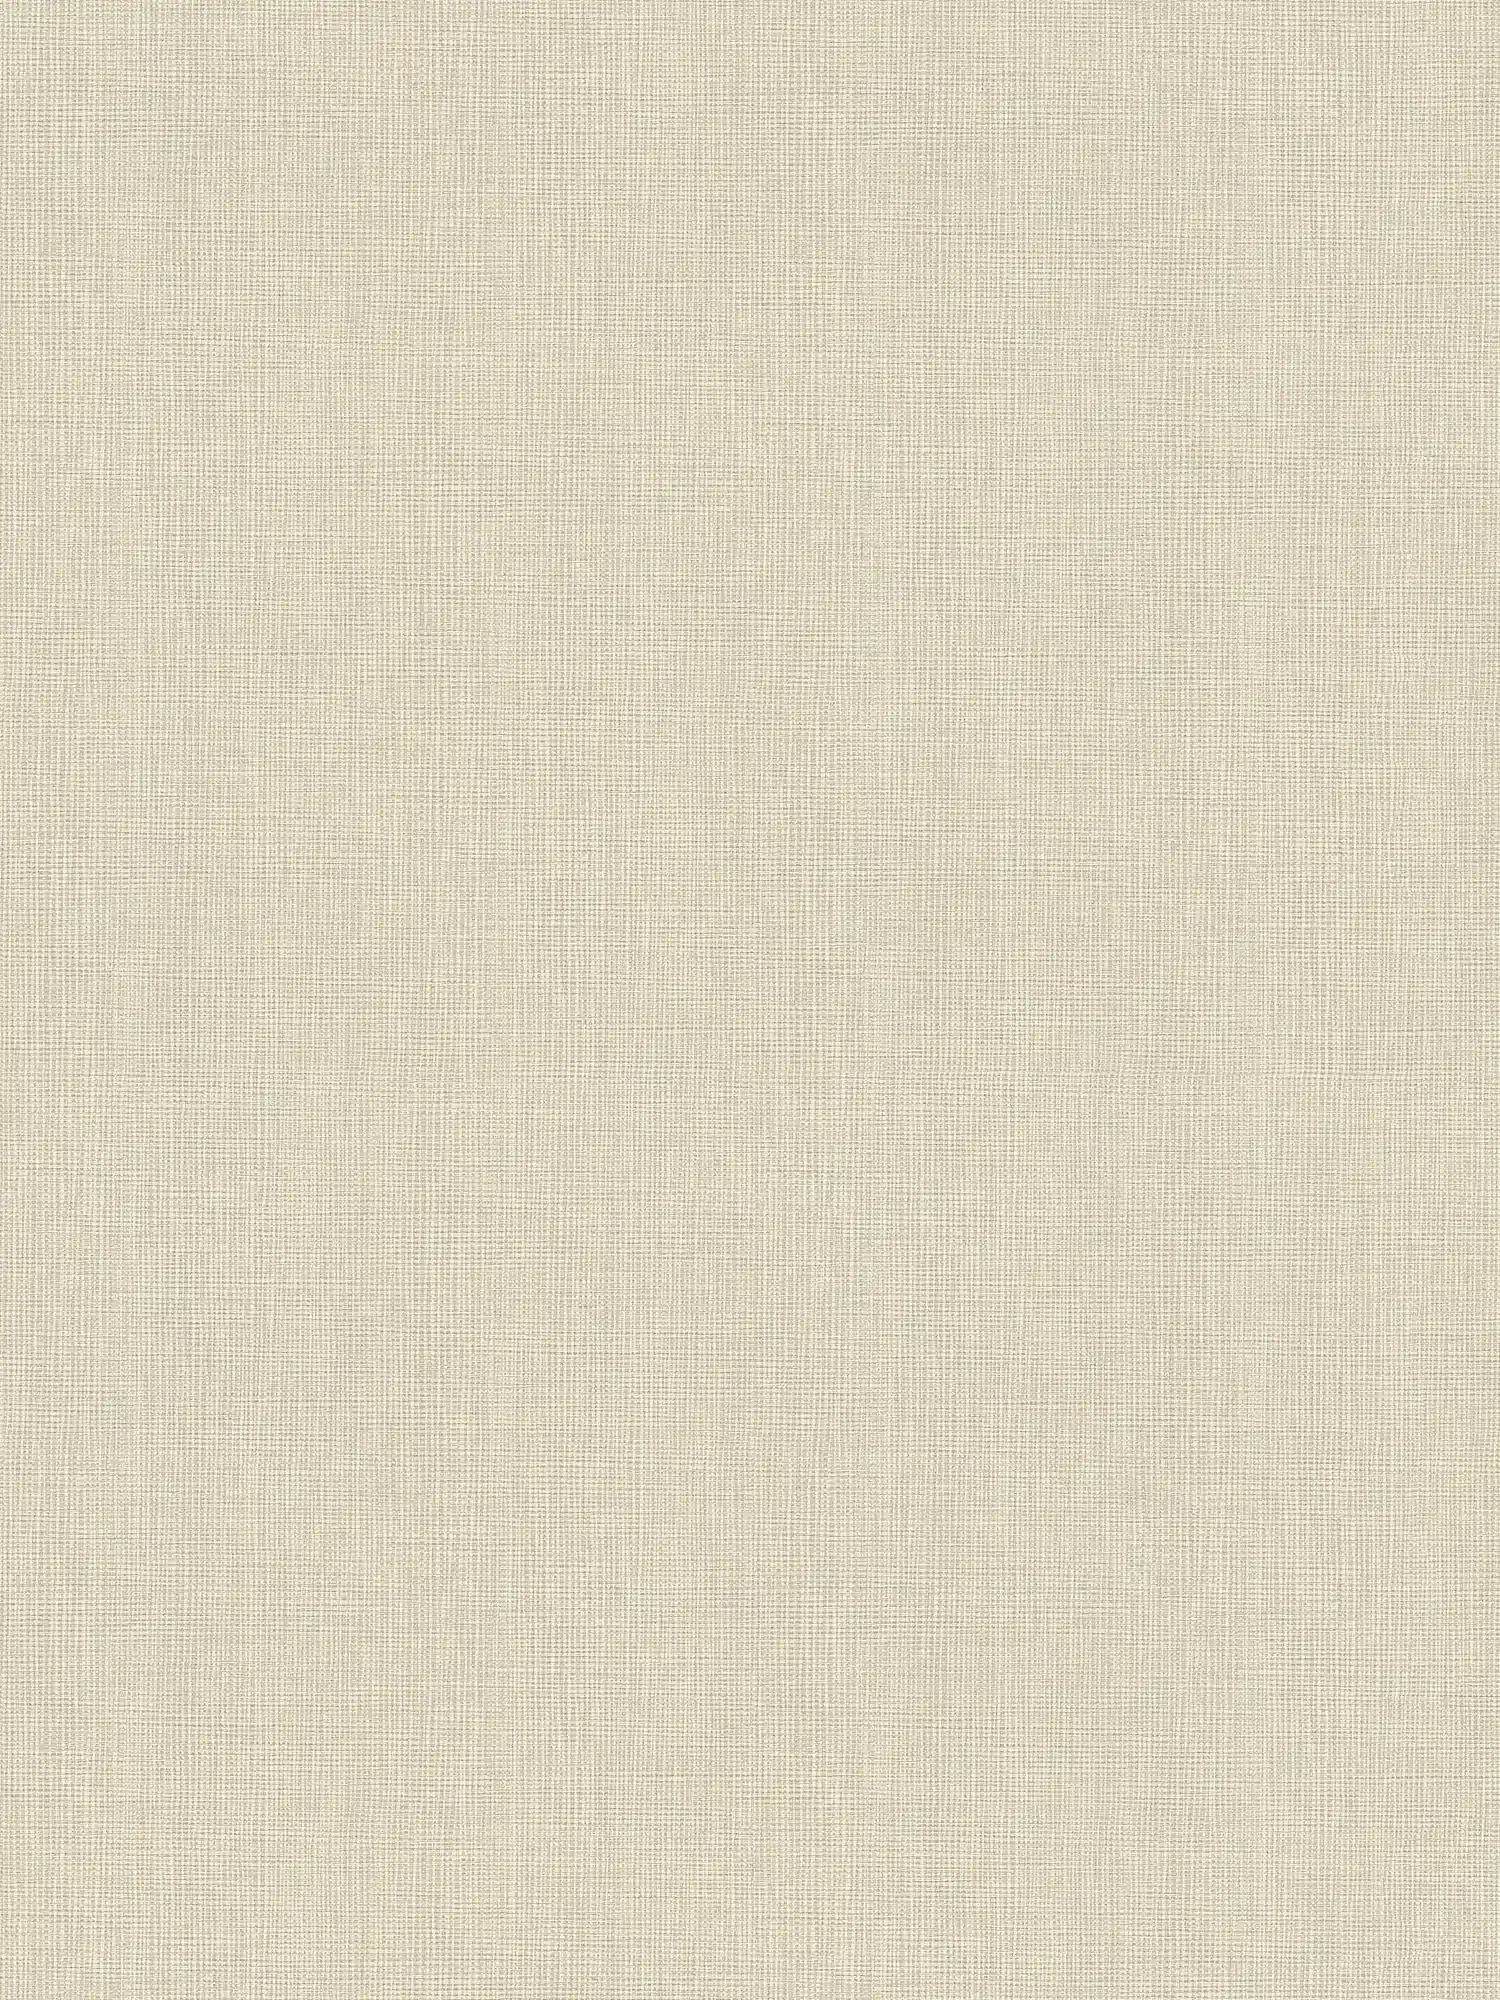 Plain non-woven wallpaper beige with textile fabric pattern
